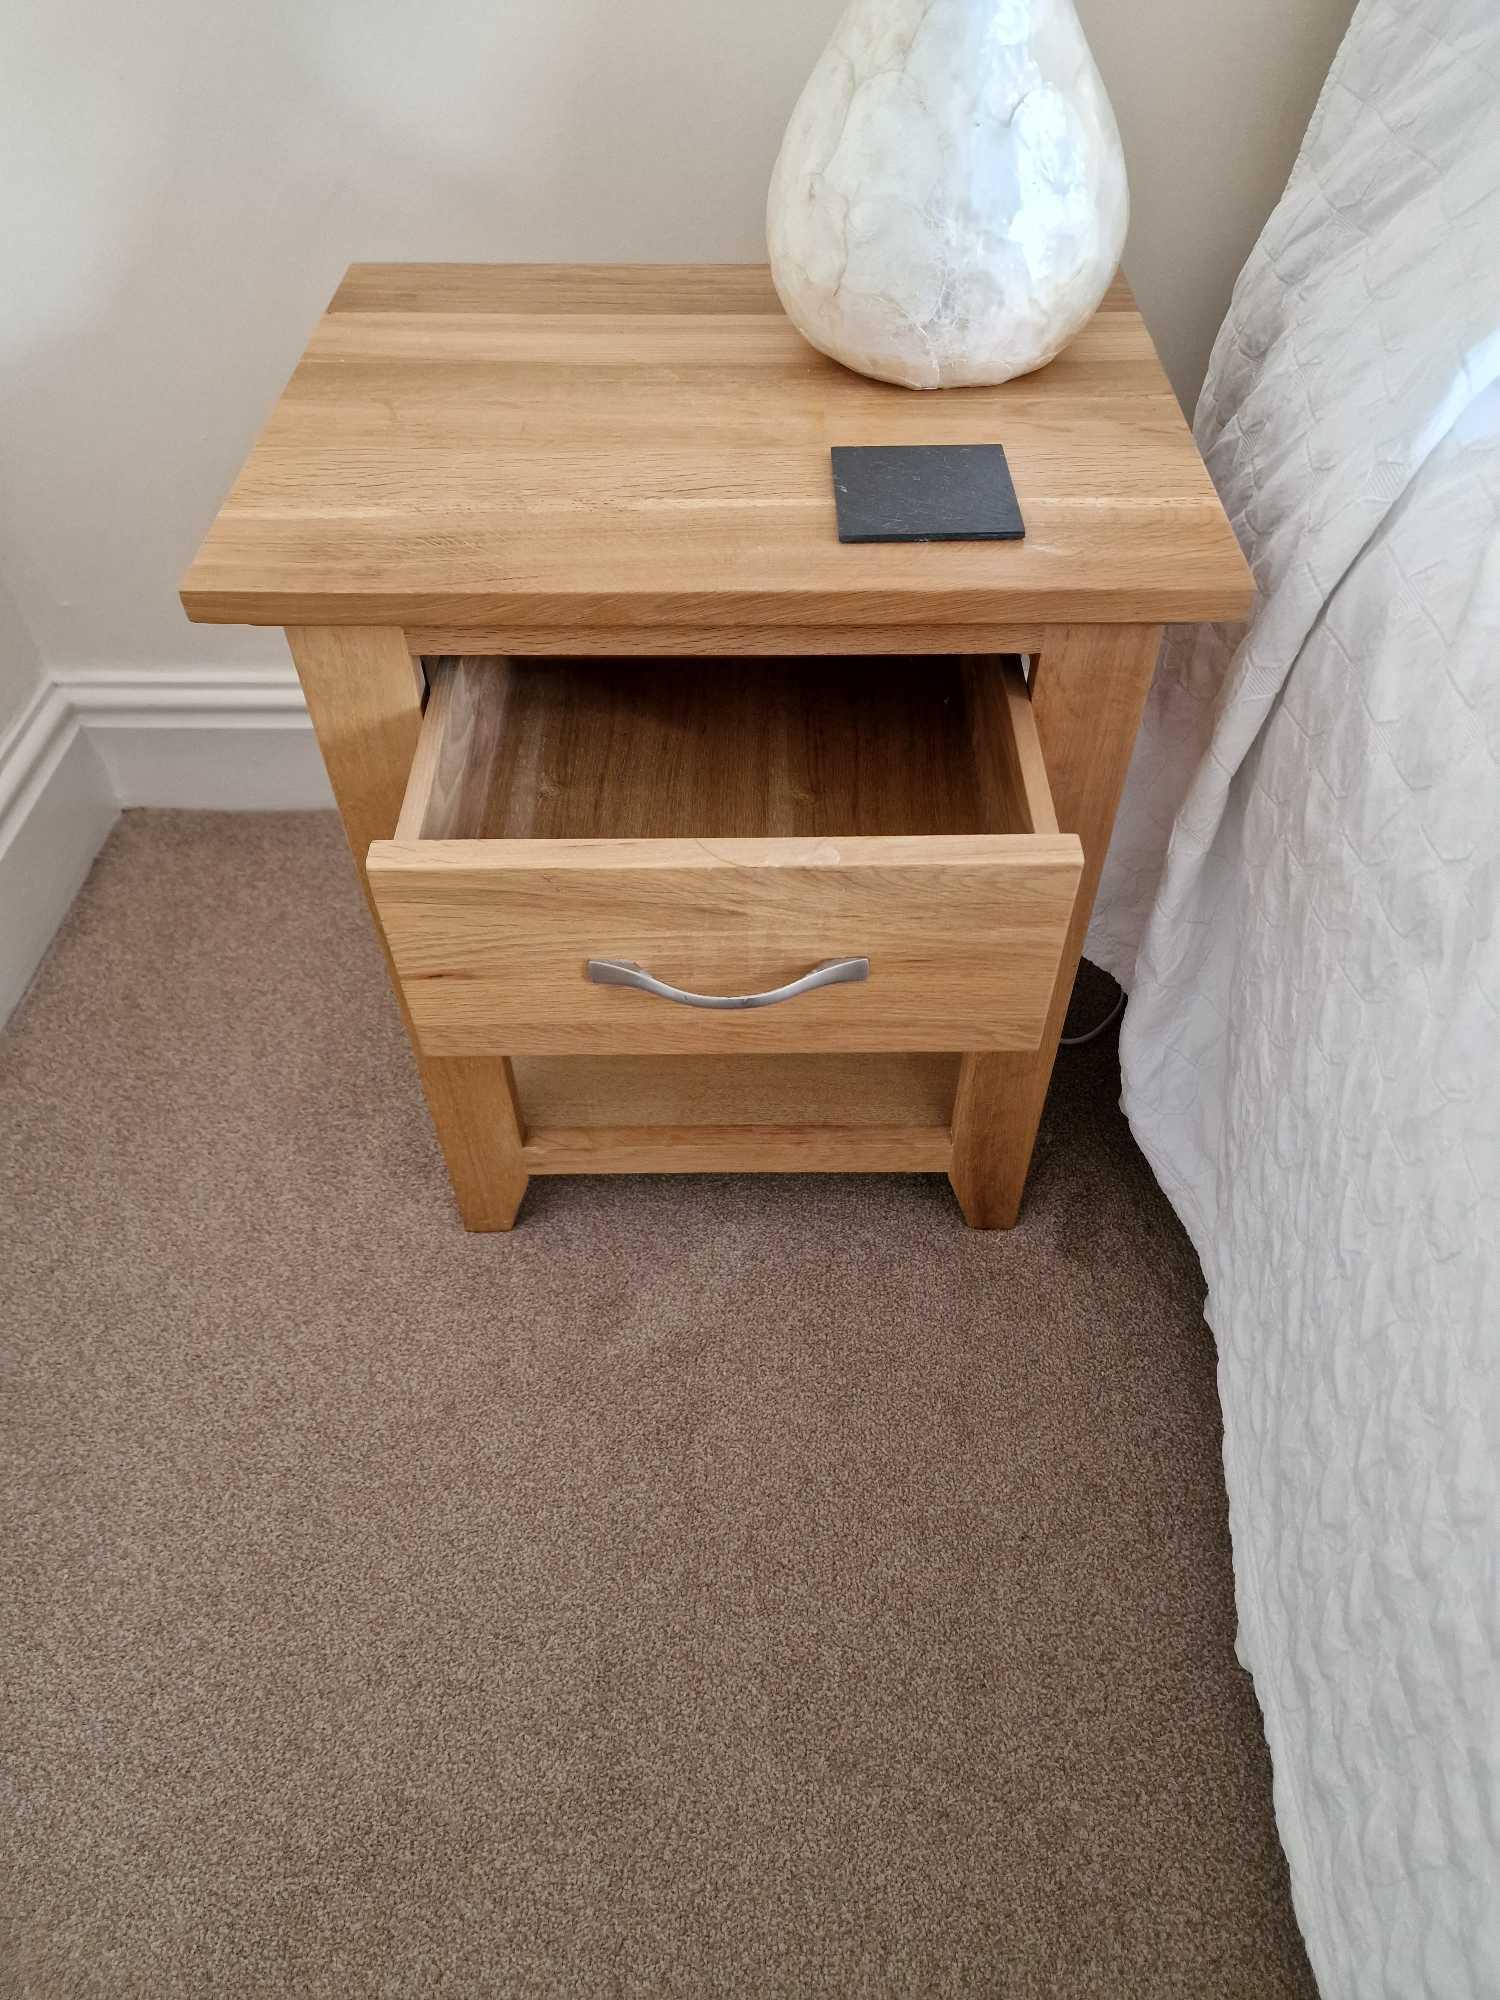 A Pair Of Bedside Tables Light Oak Finished With A Satin VarnishÃ‚ Highlights The Natural Grain Of - Image 2 of 2